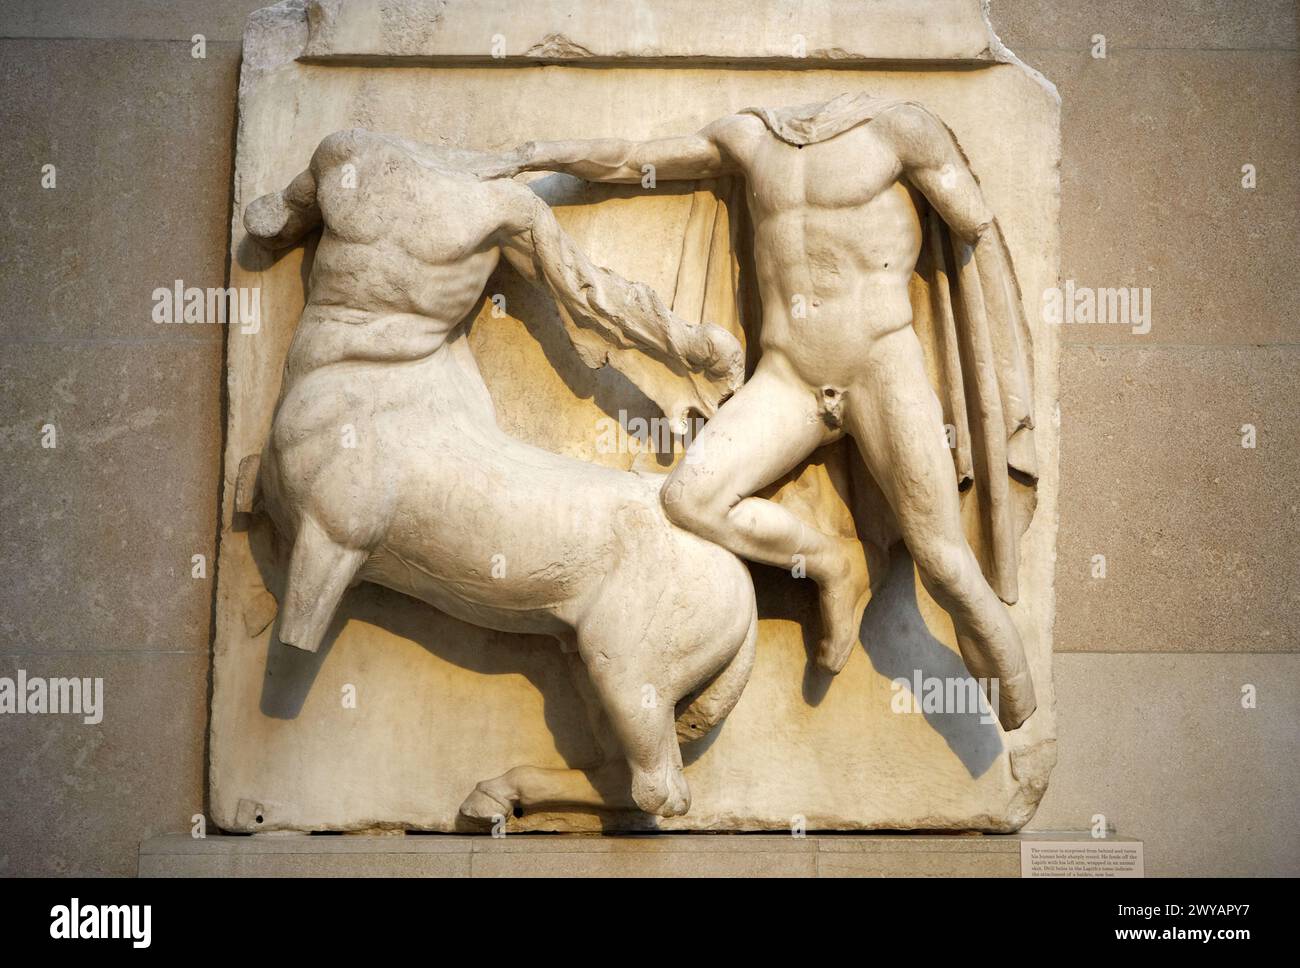 Marble metope from the Parthenon, The Parthenon sculptures, The British Museum, London. England. UK. Stock Photo